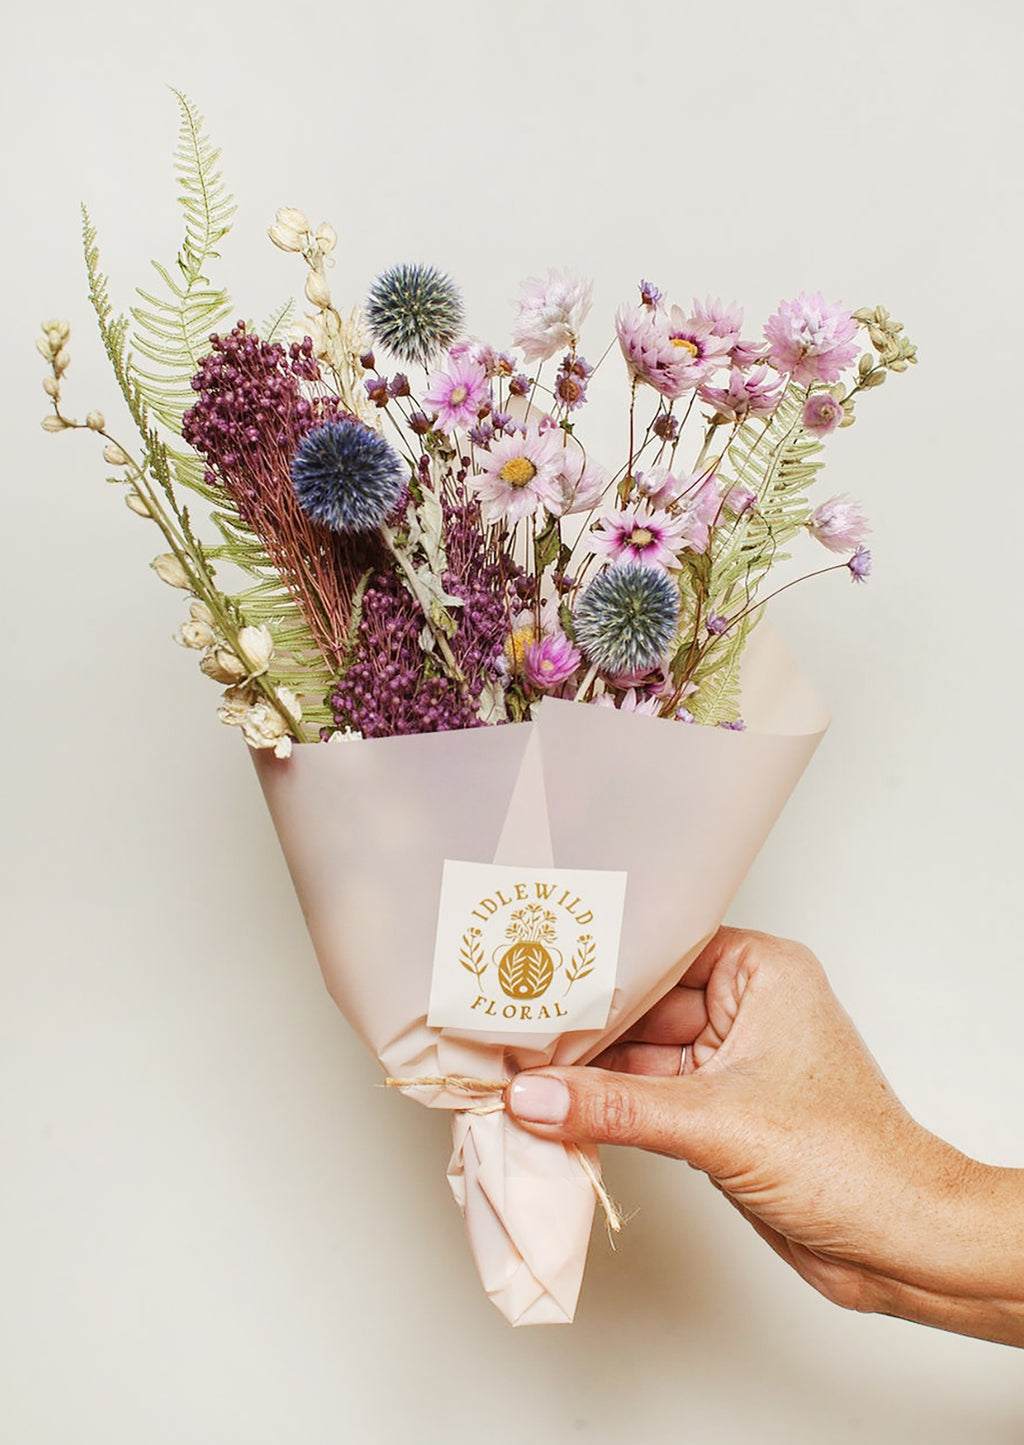 Twilight Multi: A dried floral arrangement in soft muted tones.